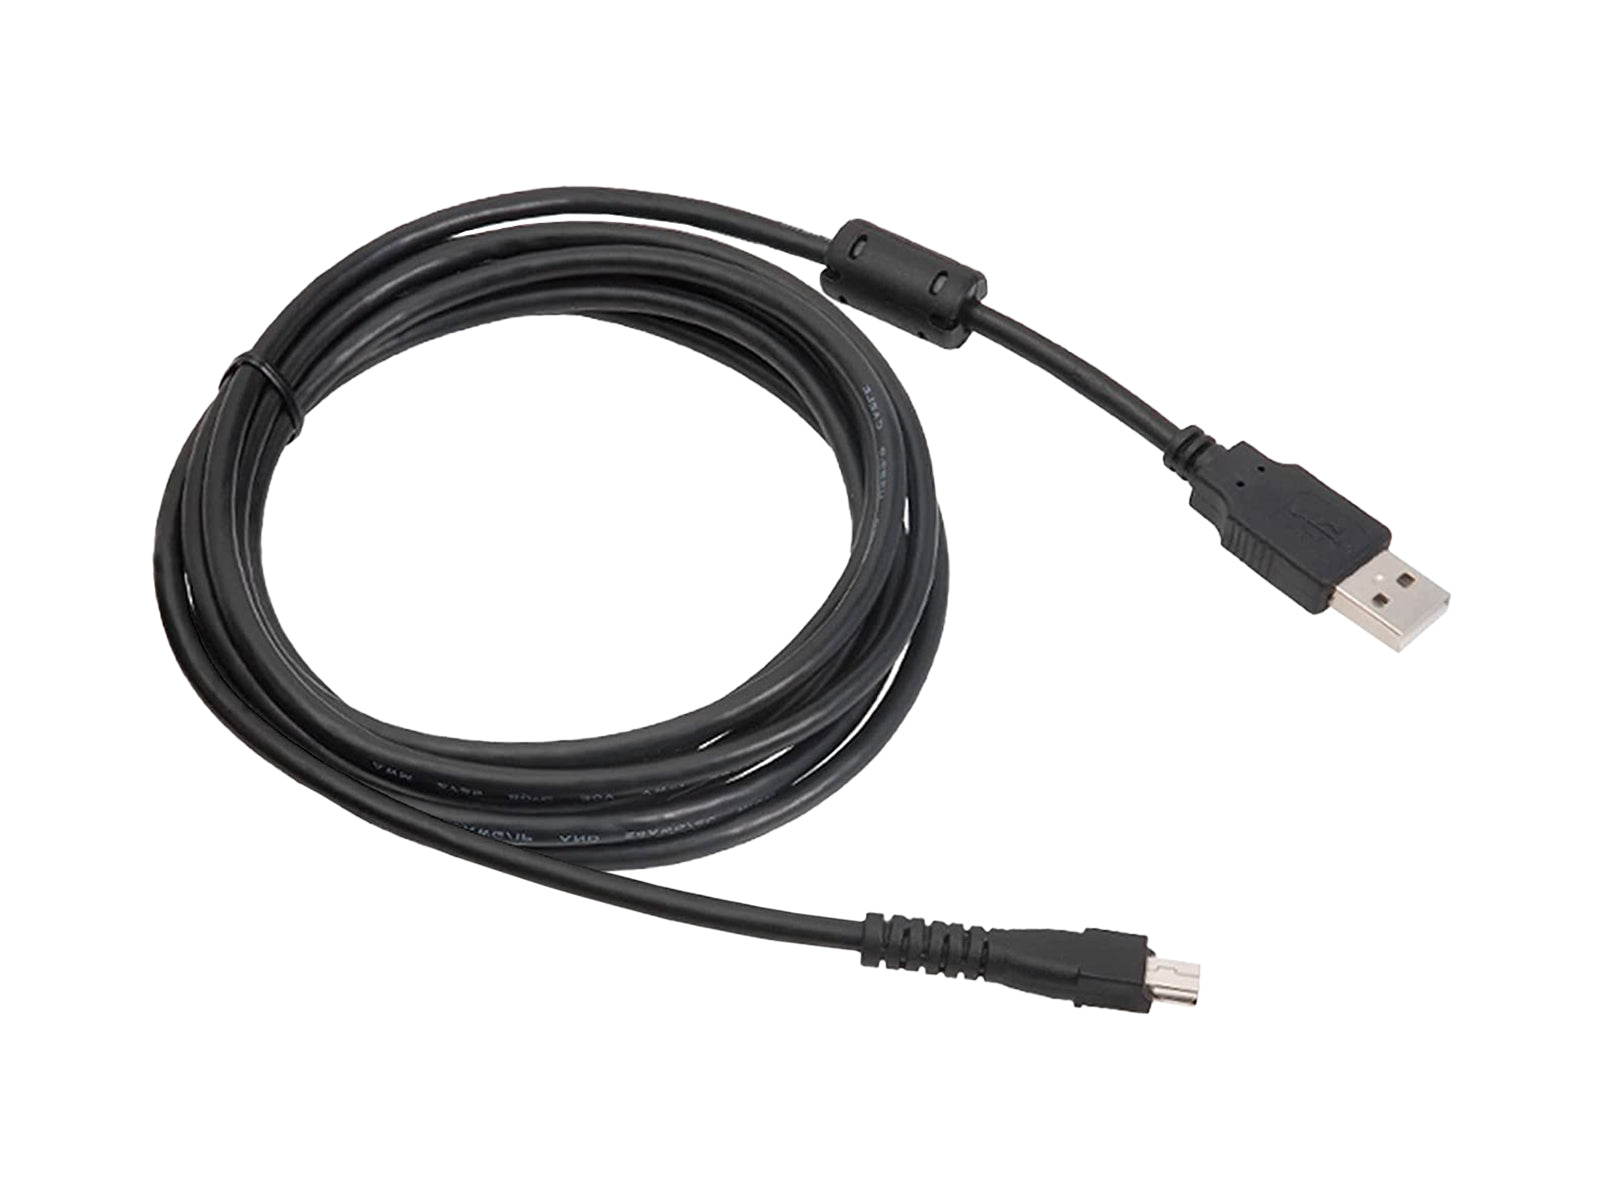 Philips OEM Replacement USB Cable for Speechmike Microphones - 8ft | 2.4m (ACC0034) Monitors.com 